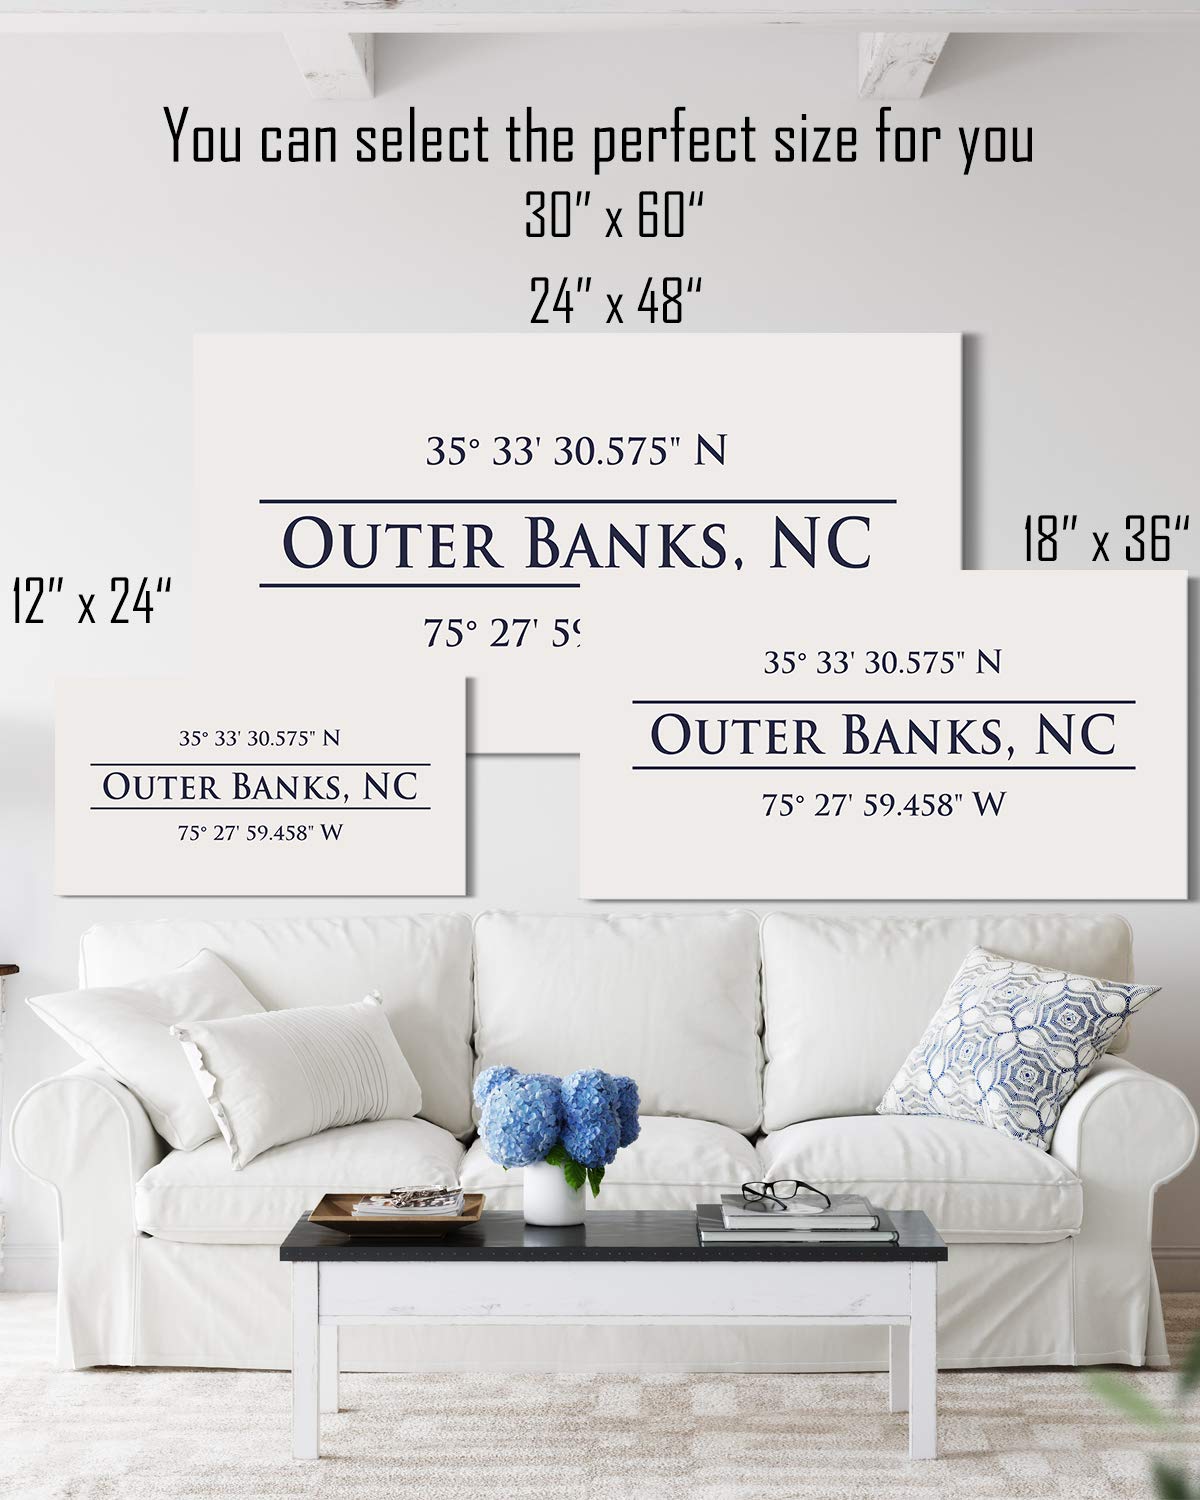 Outer Banks, NC 35° 33' 30.575" N, 75° 27' 59.458" W - Wall Decor Art Canvas with an offwhite background - Ready to Hang - Great for above a couch, table, bed or more